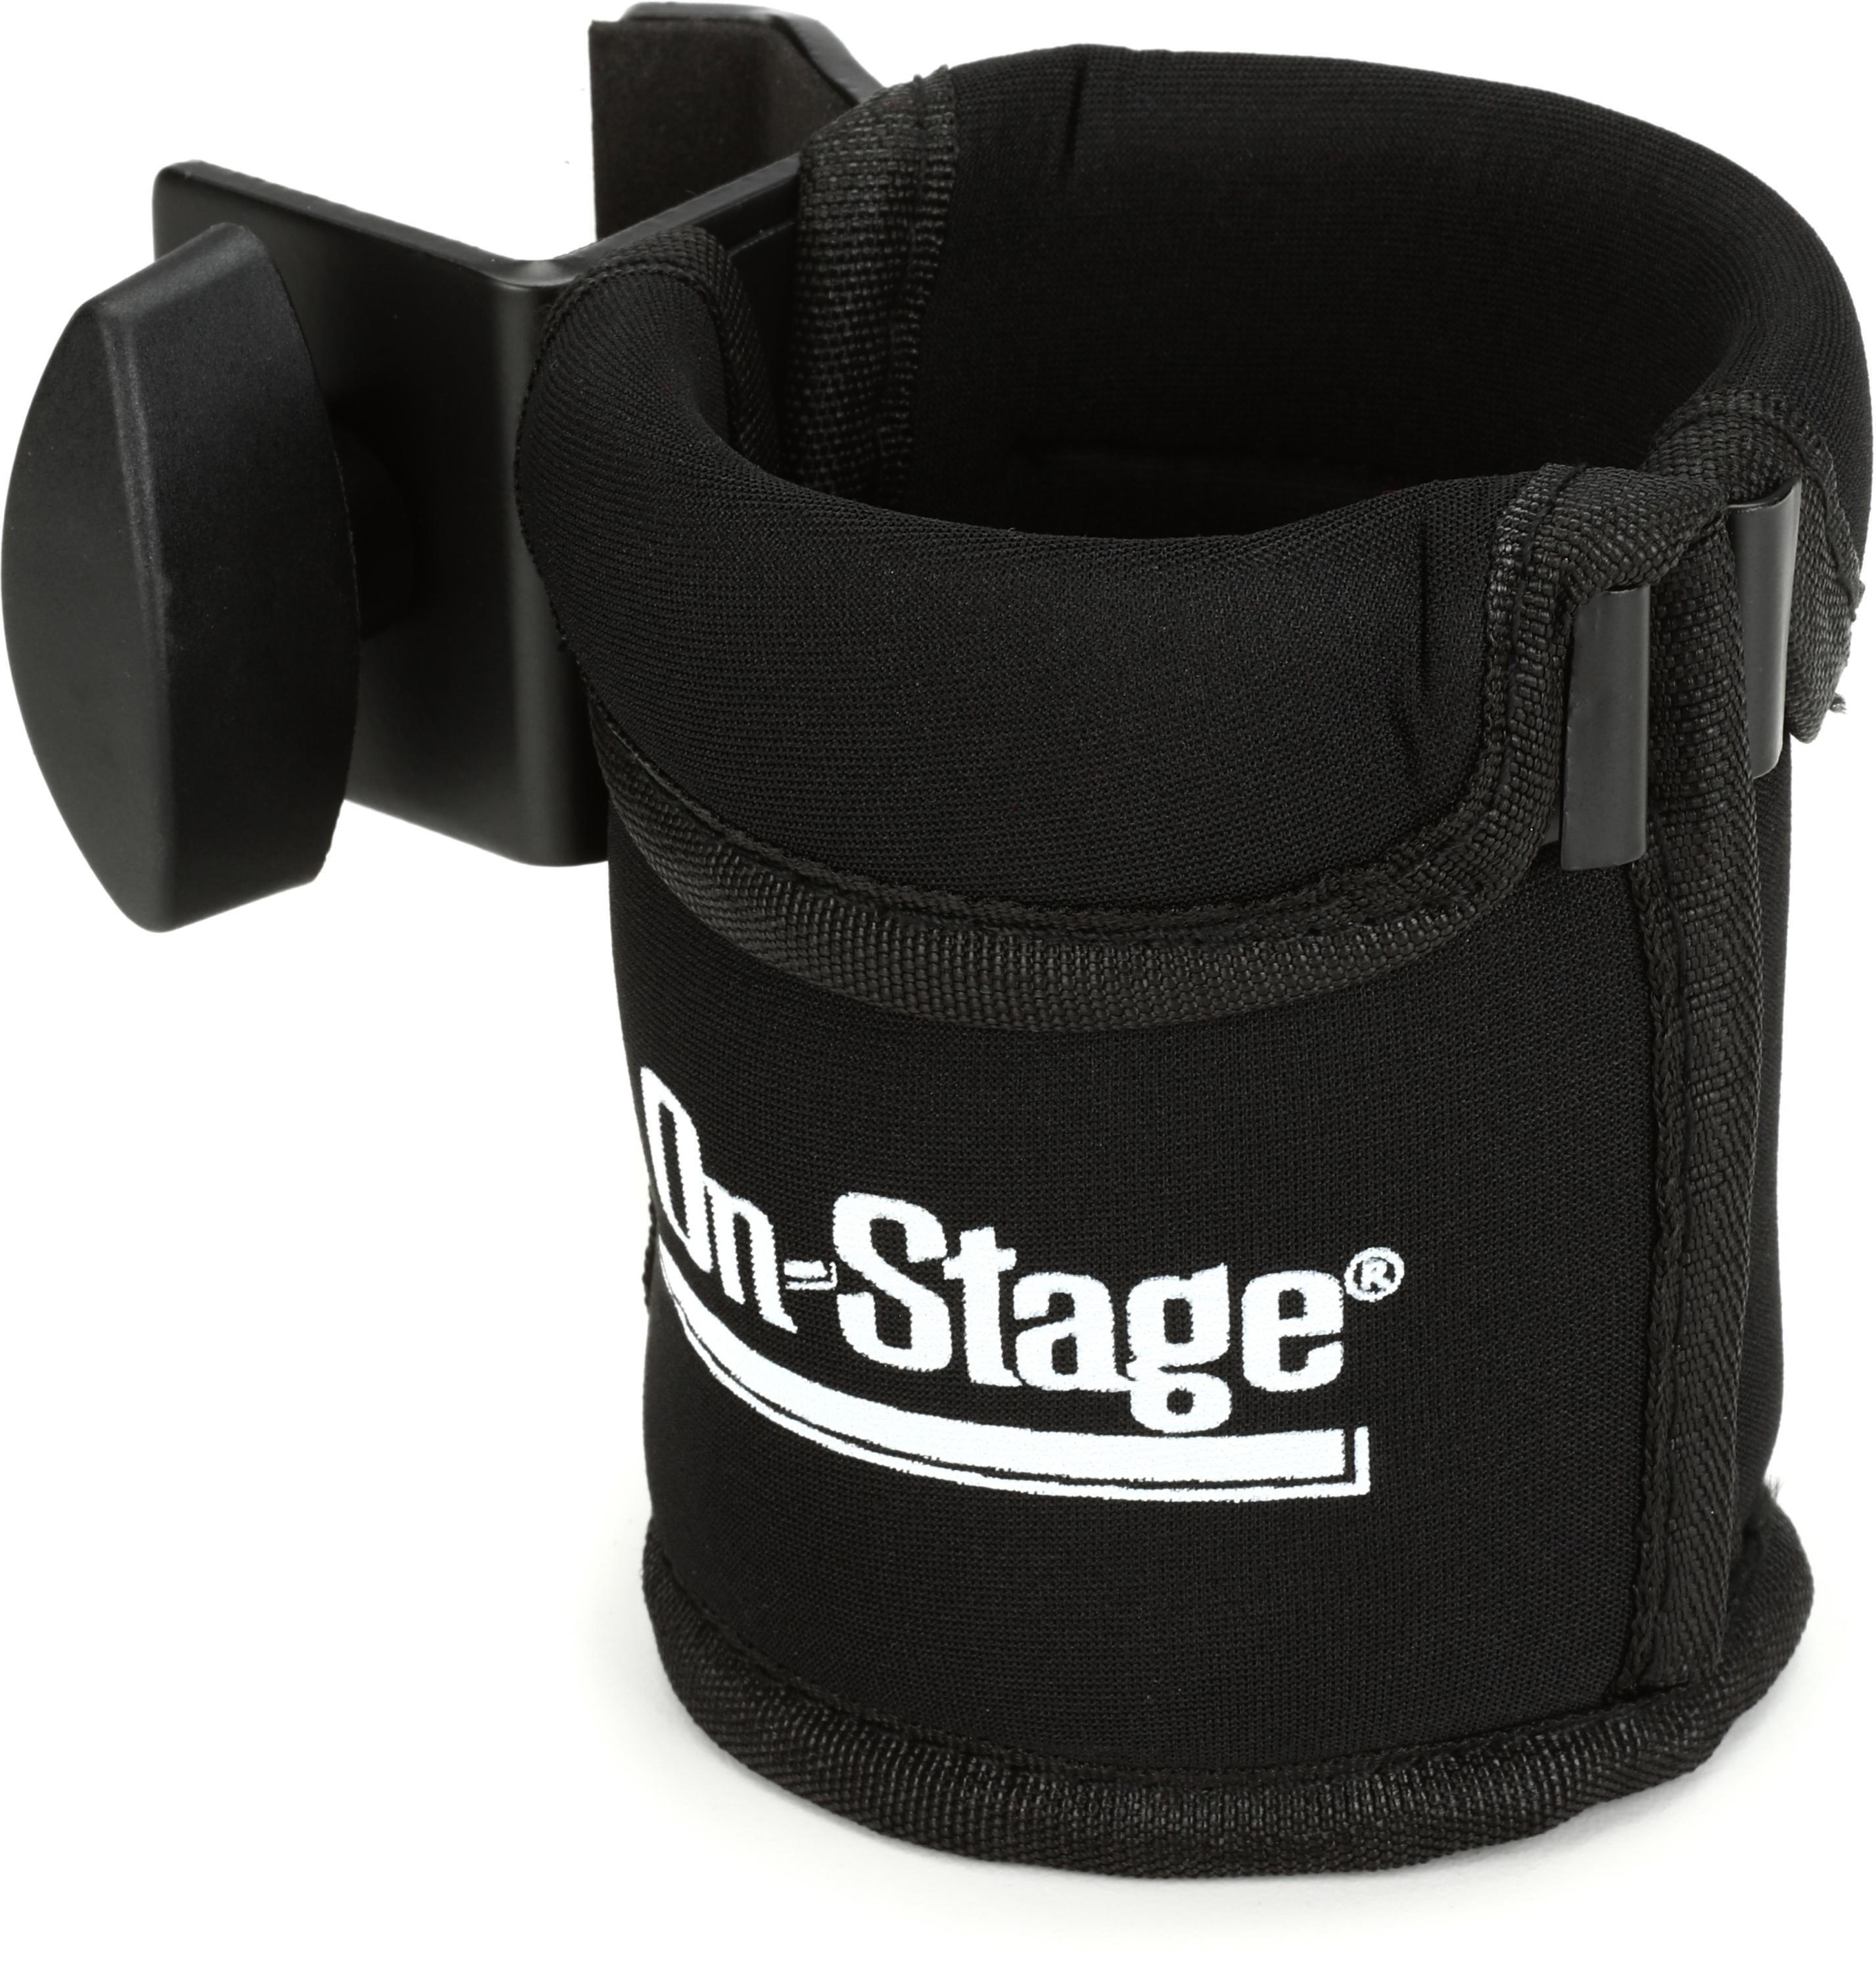 Double Beverage/Cup/Drink Holder- 4.5 x 13 -SB2